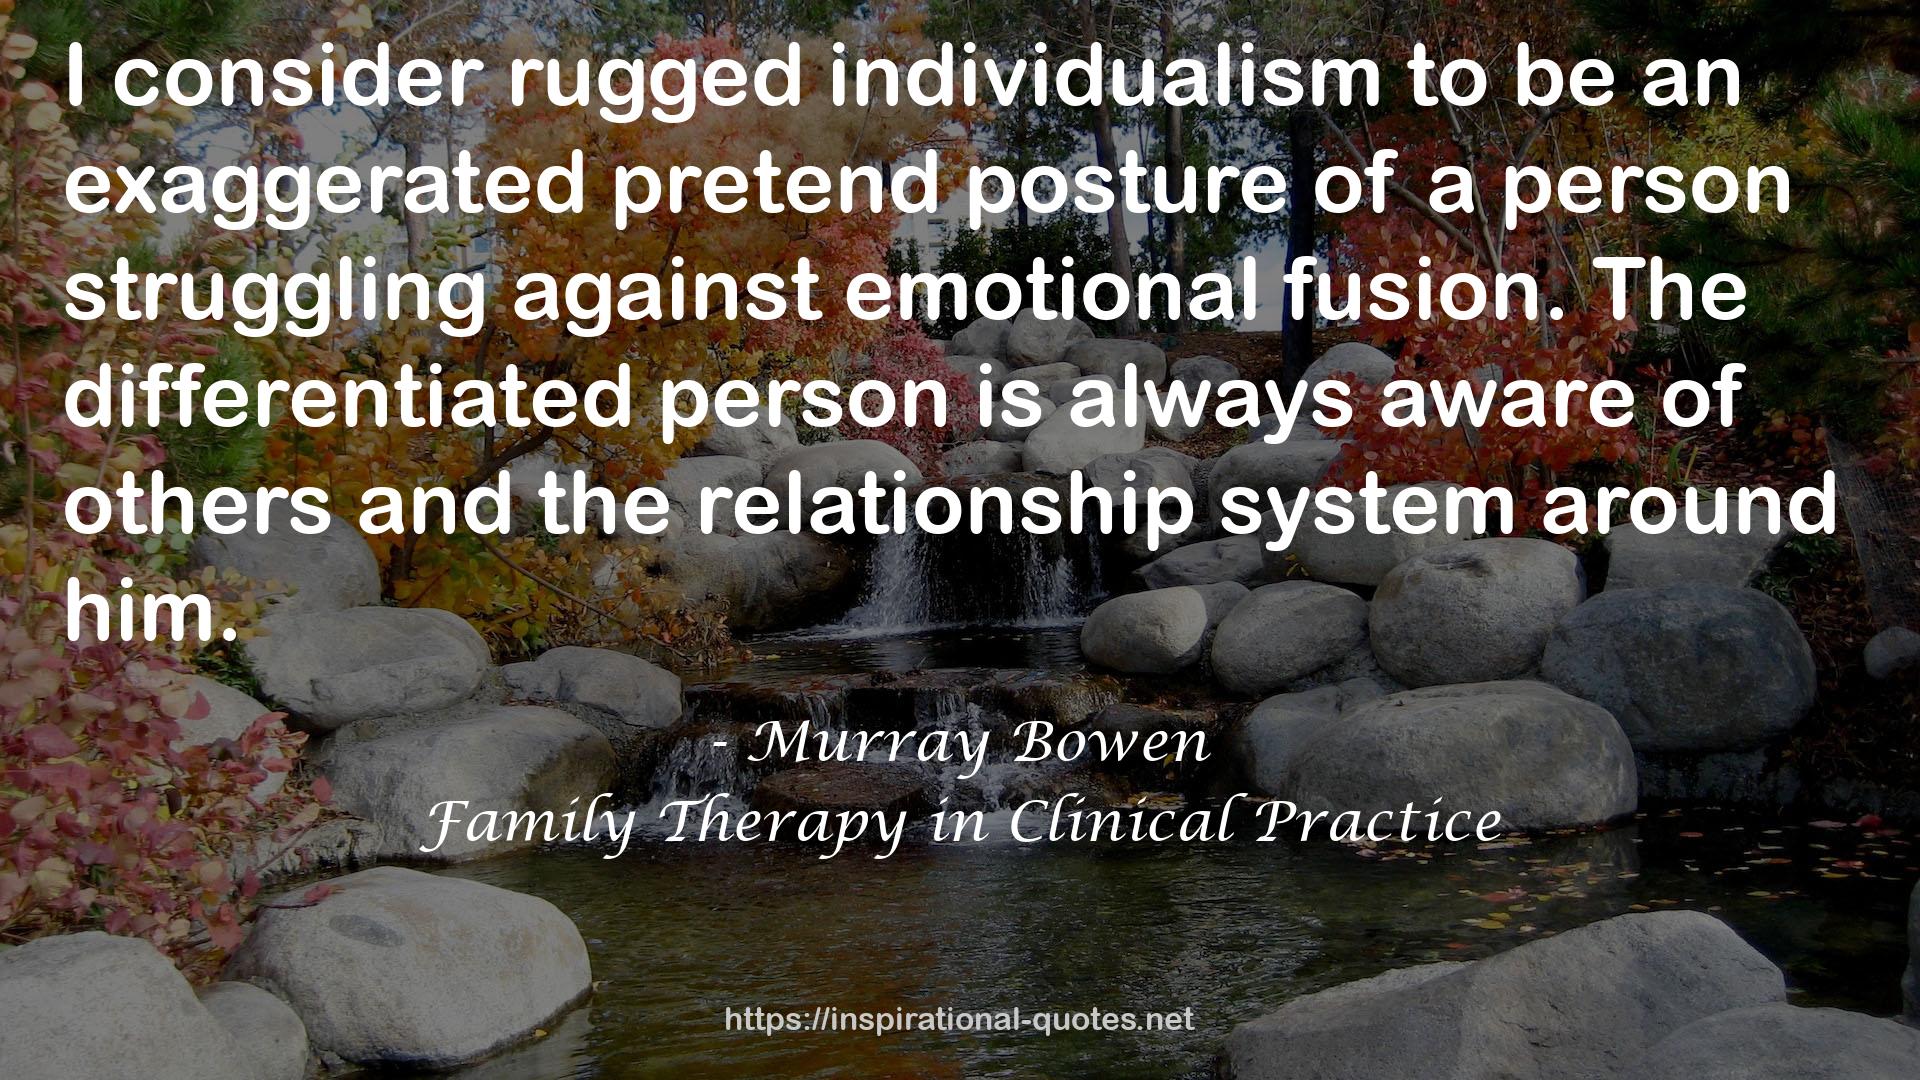 Family Therapy in Clinical Practice QUOTES